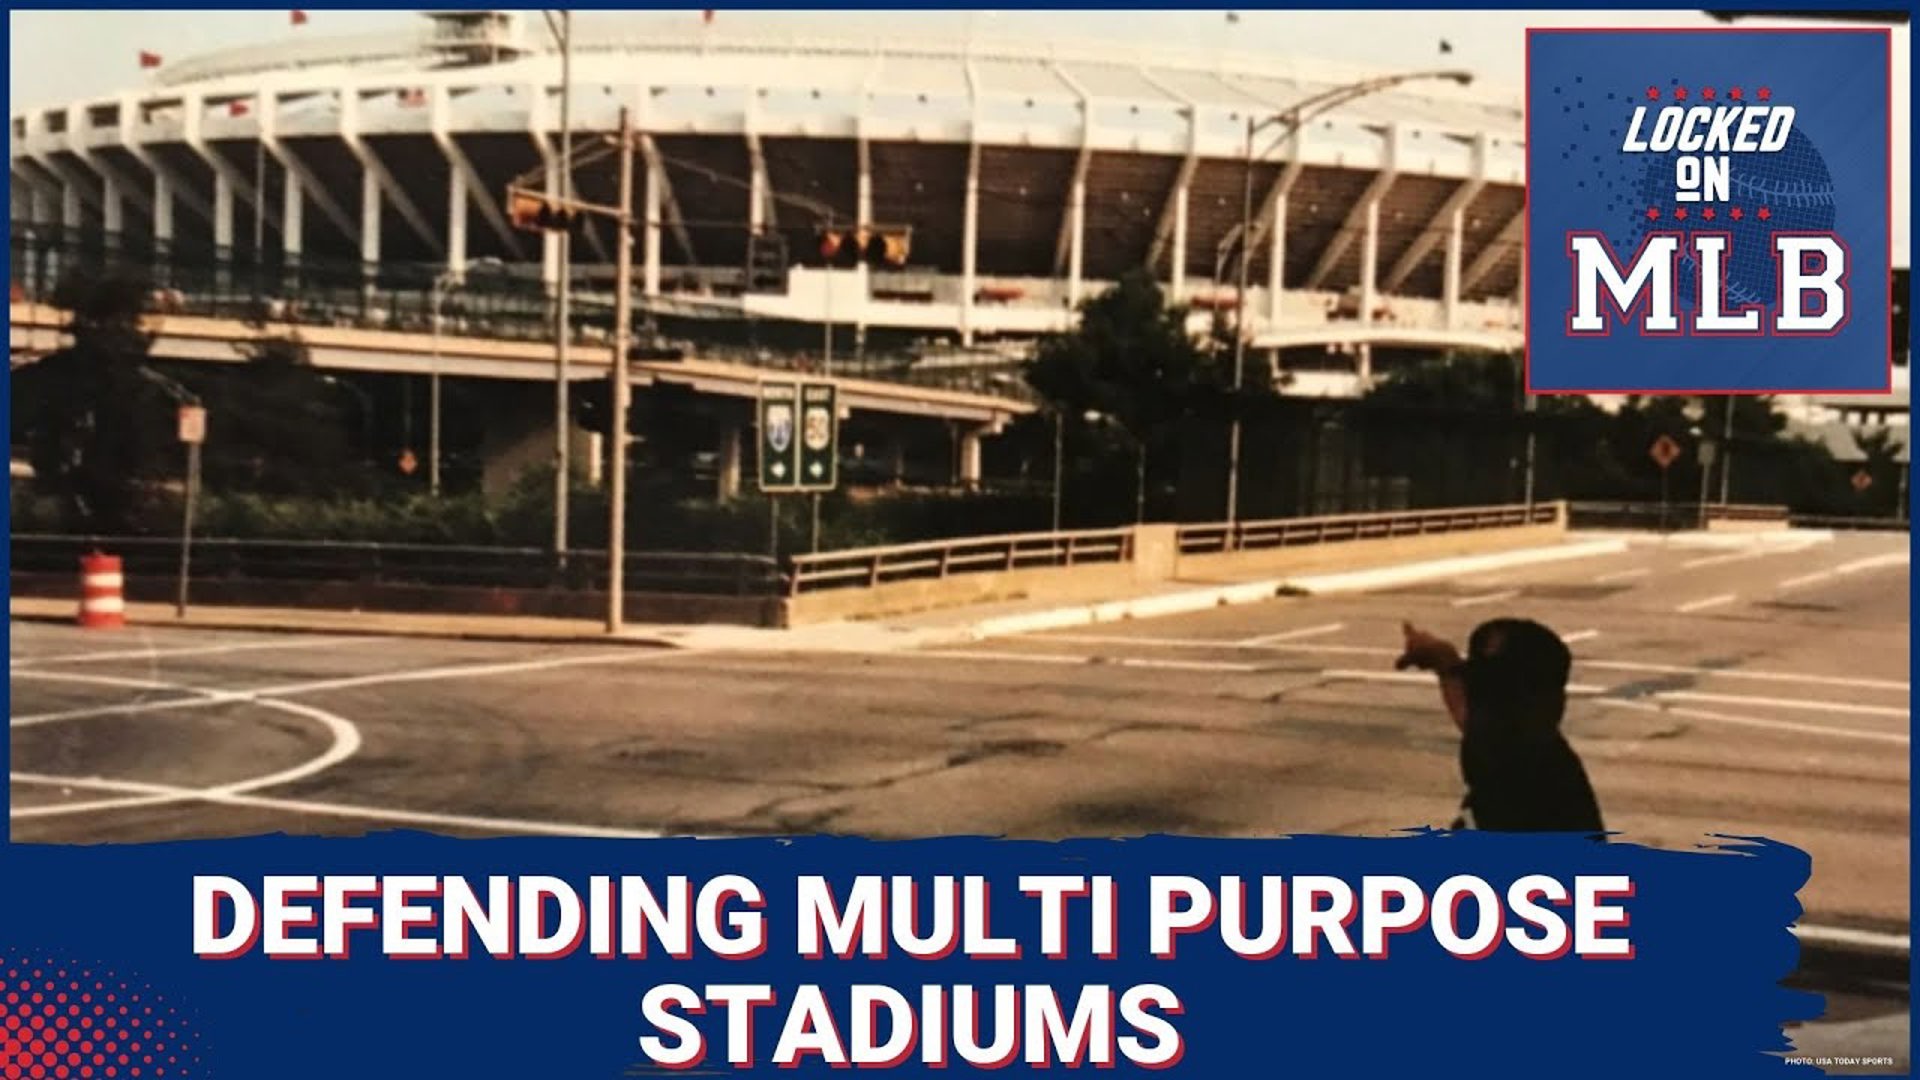 When Oakland leaves, MLB will have no more multi purpose stadiums. Should they come back?